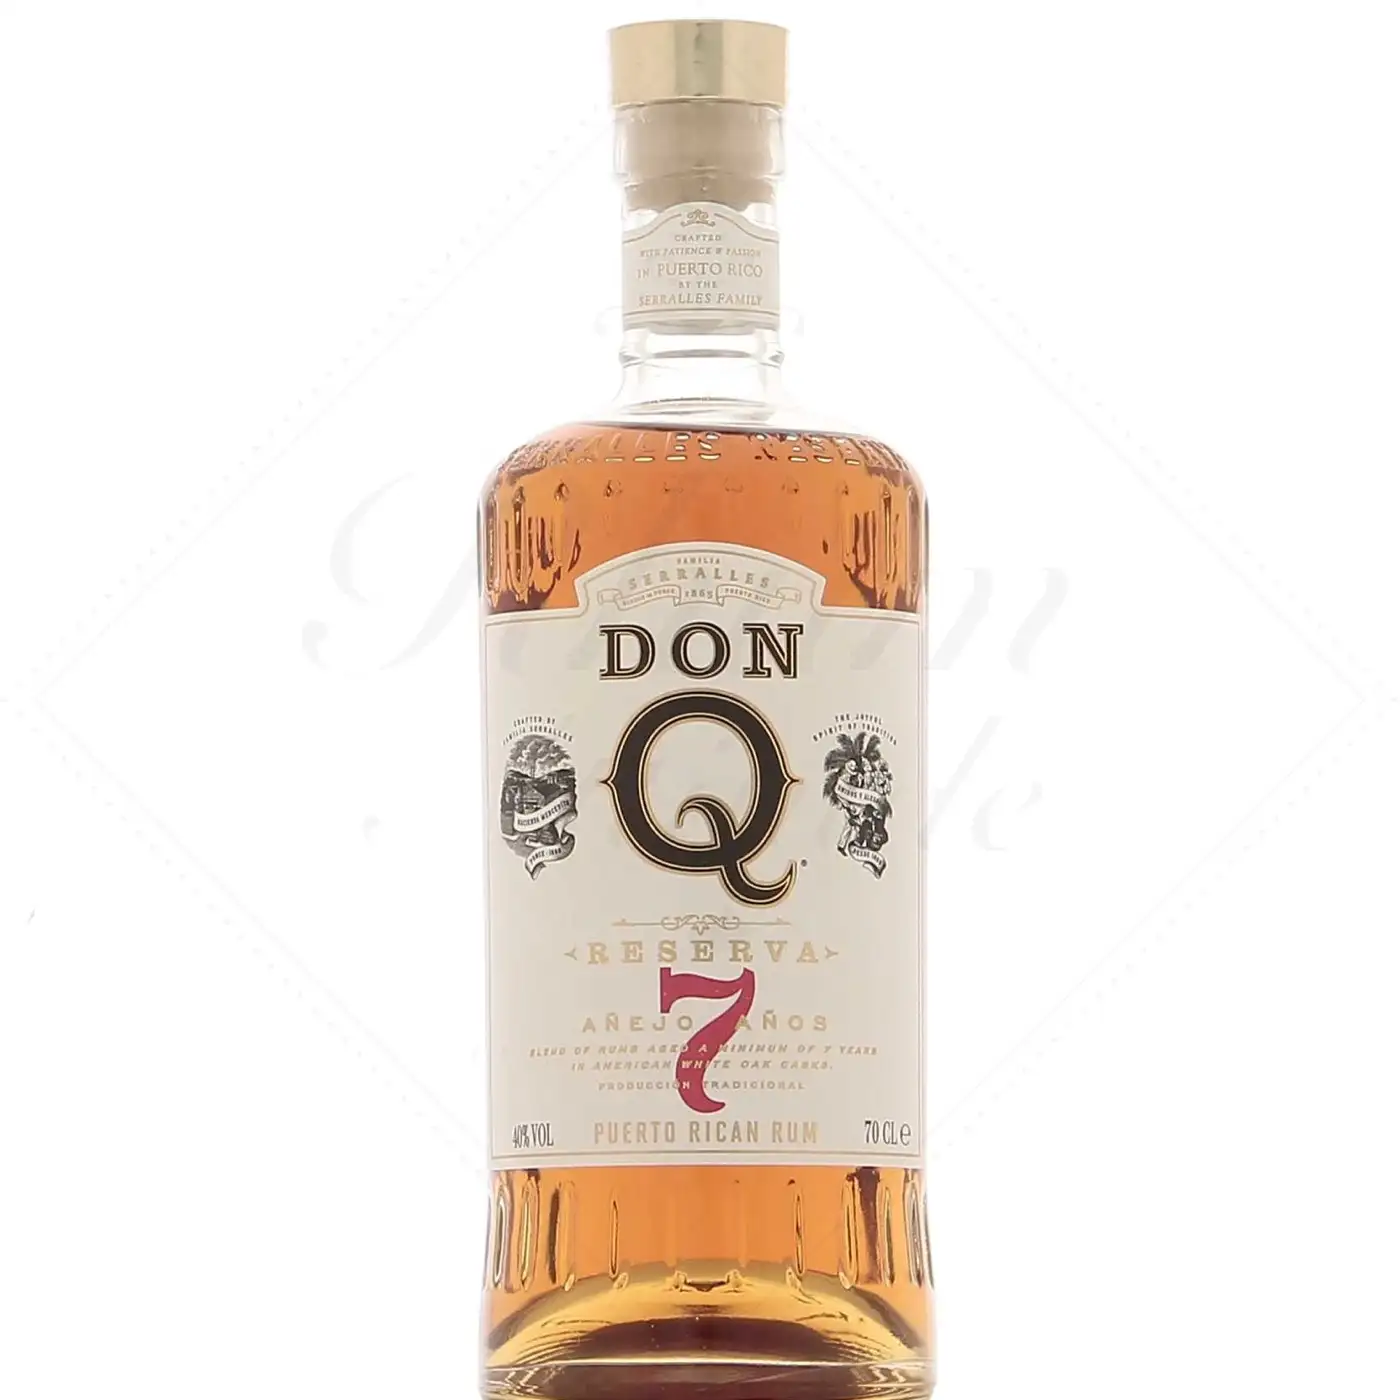 Image of the front of the bottle of the rum Don Q Reserva Añejo 7 Años